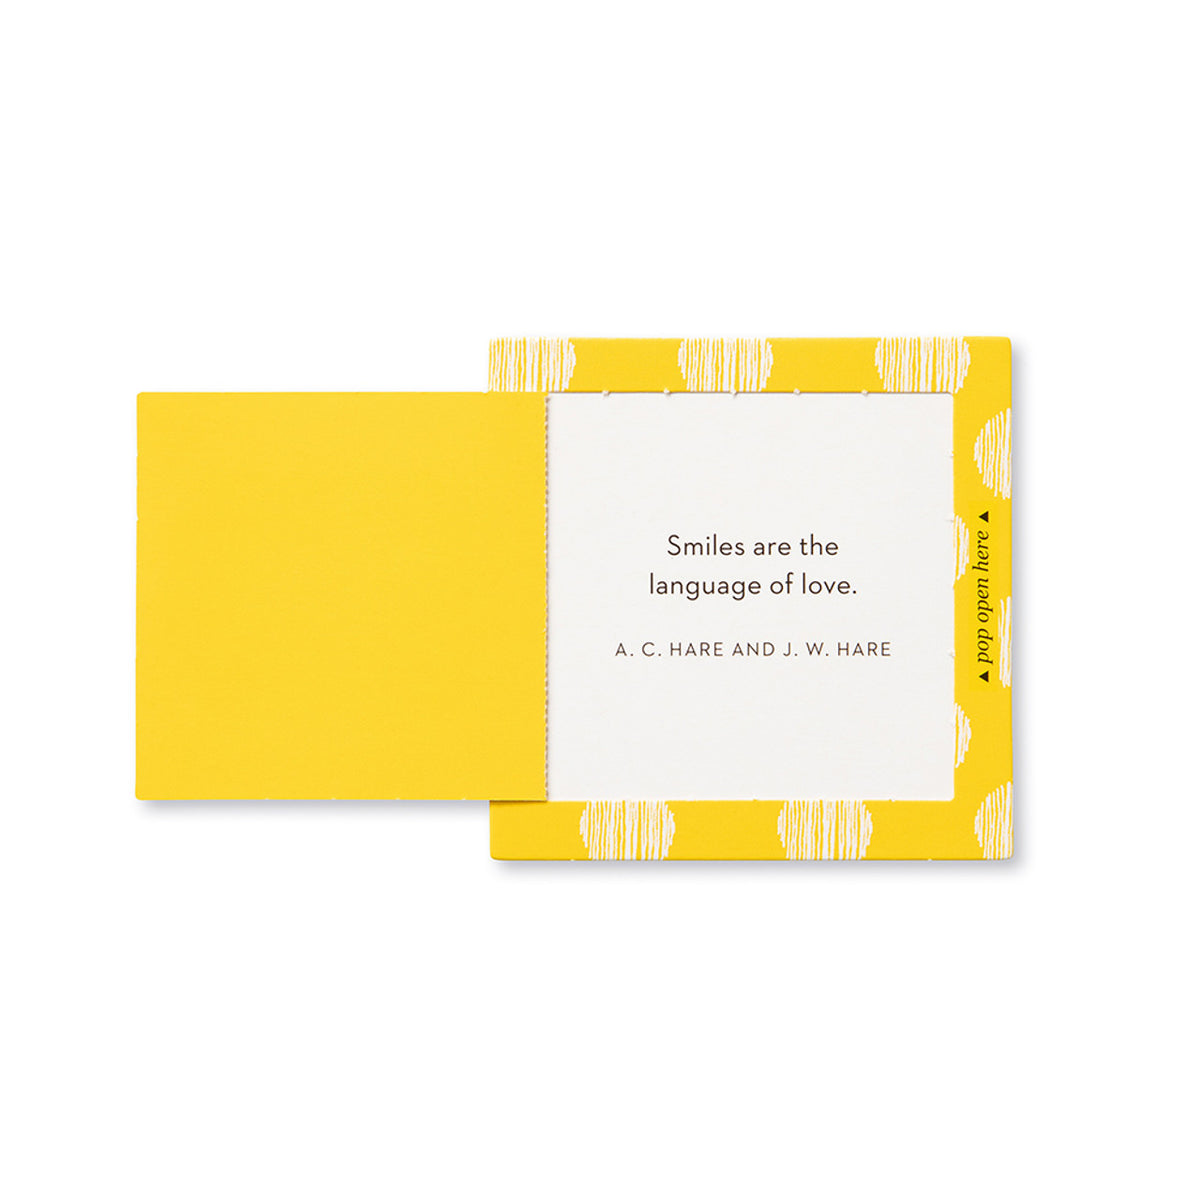 Sample card - "Smiles are the language of love."